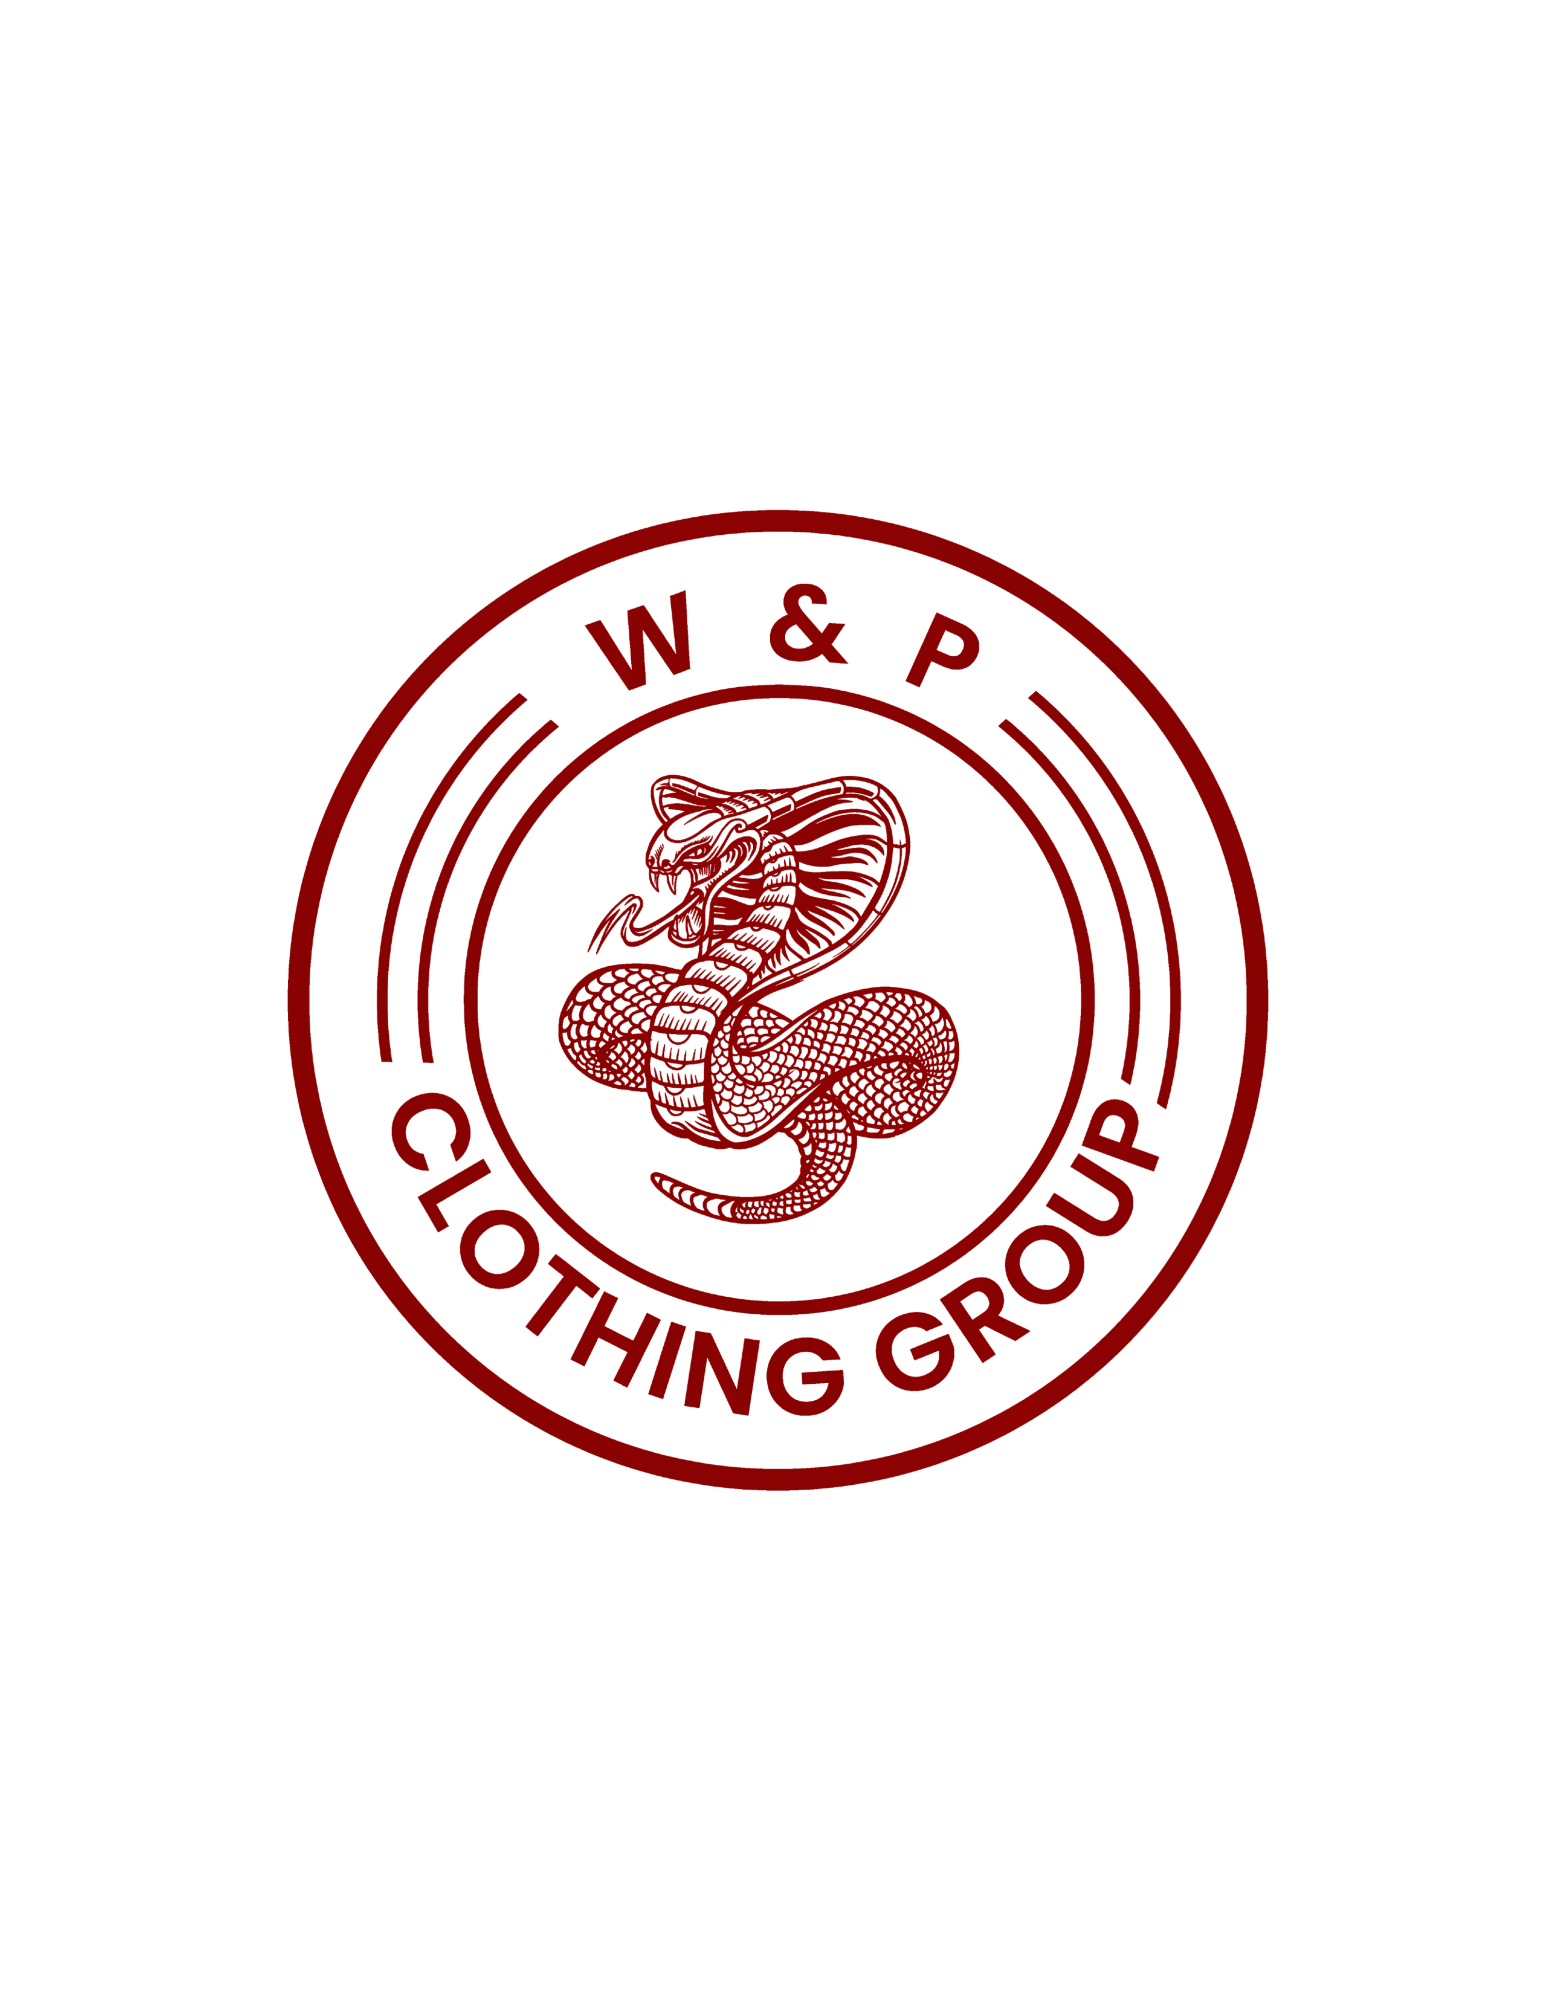 W&P Clothing Group